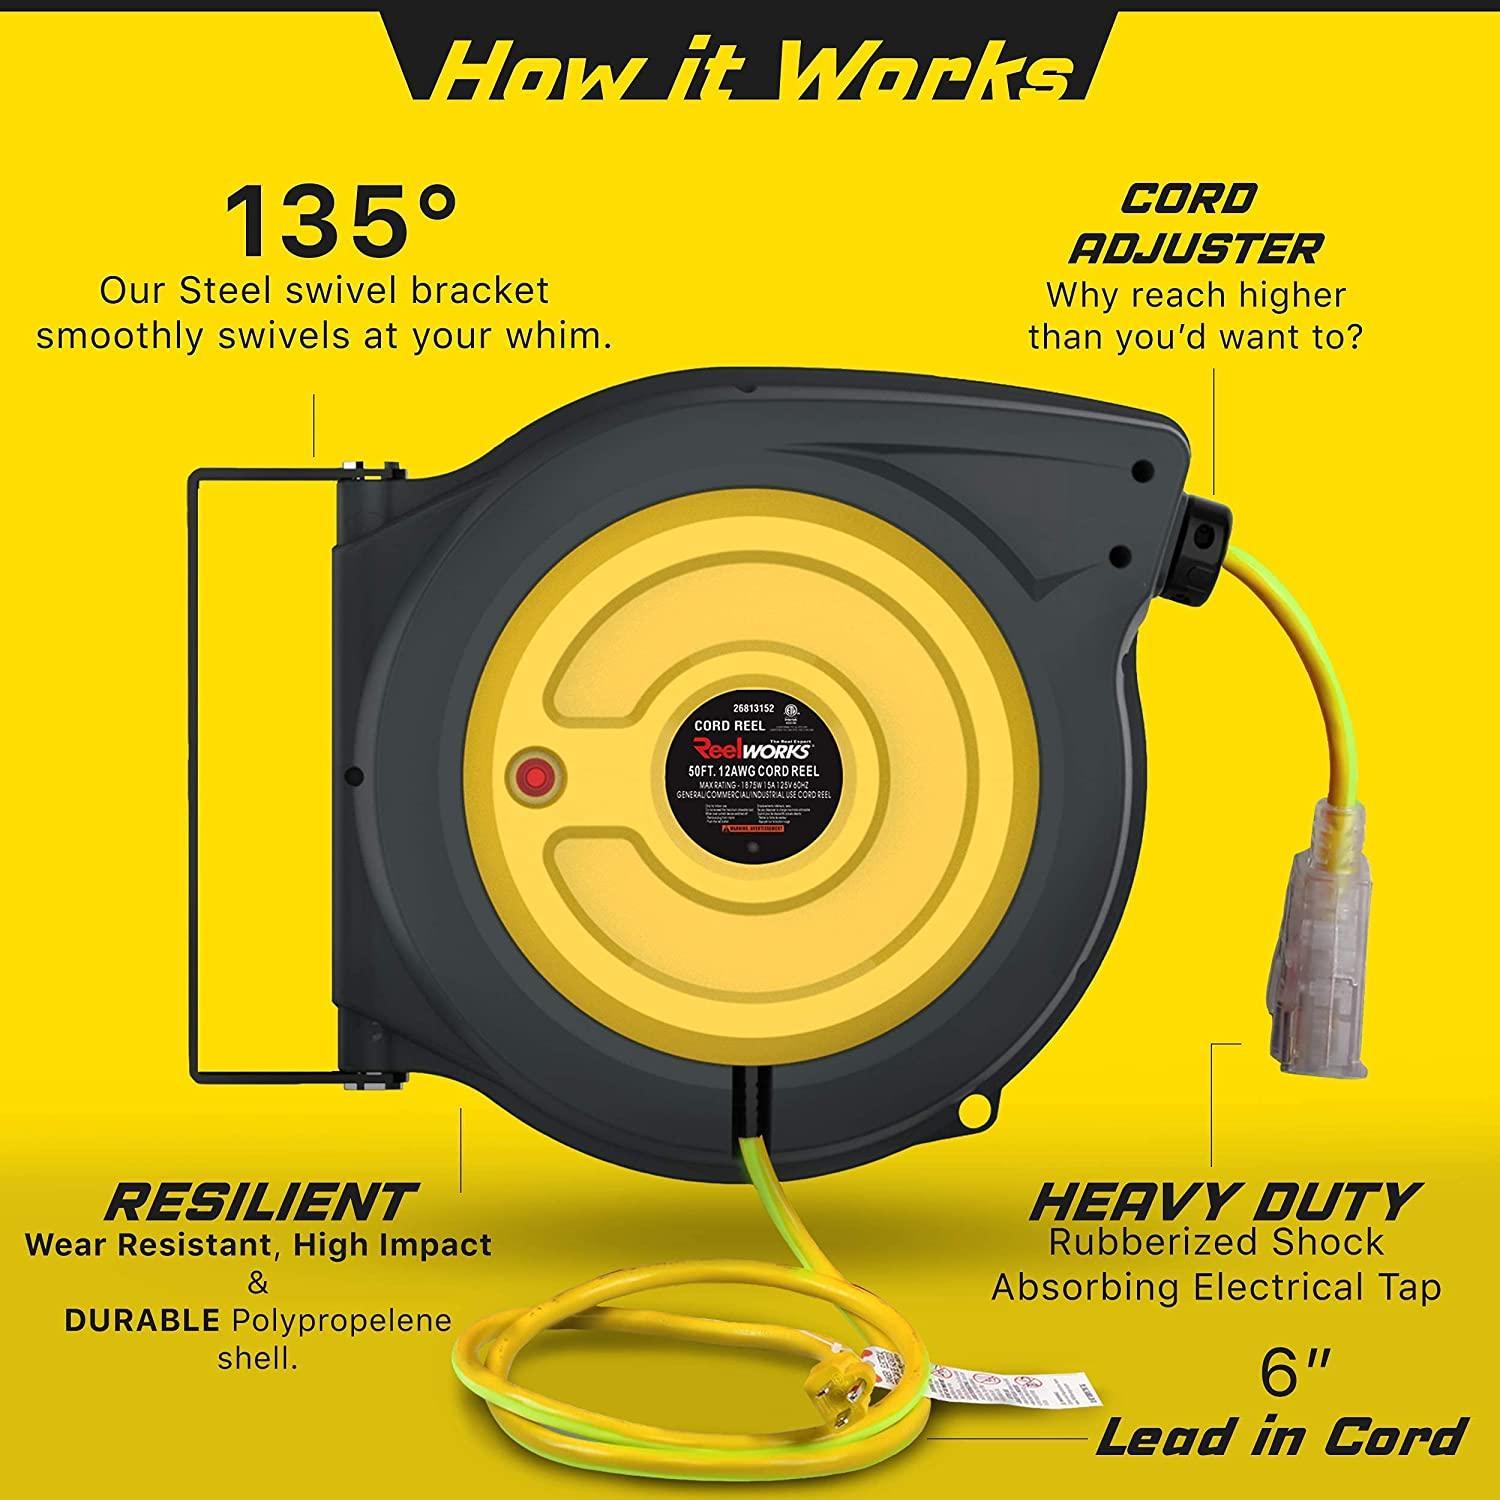 Retractable Extension Cord Reel 50FT+ 3FT Electric Cord Reel